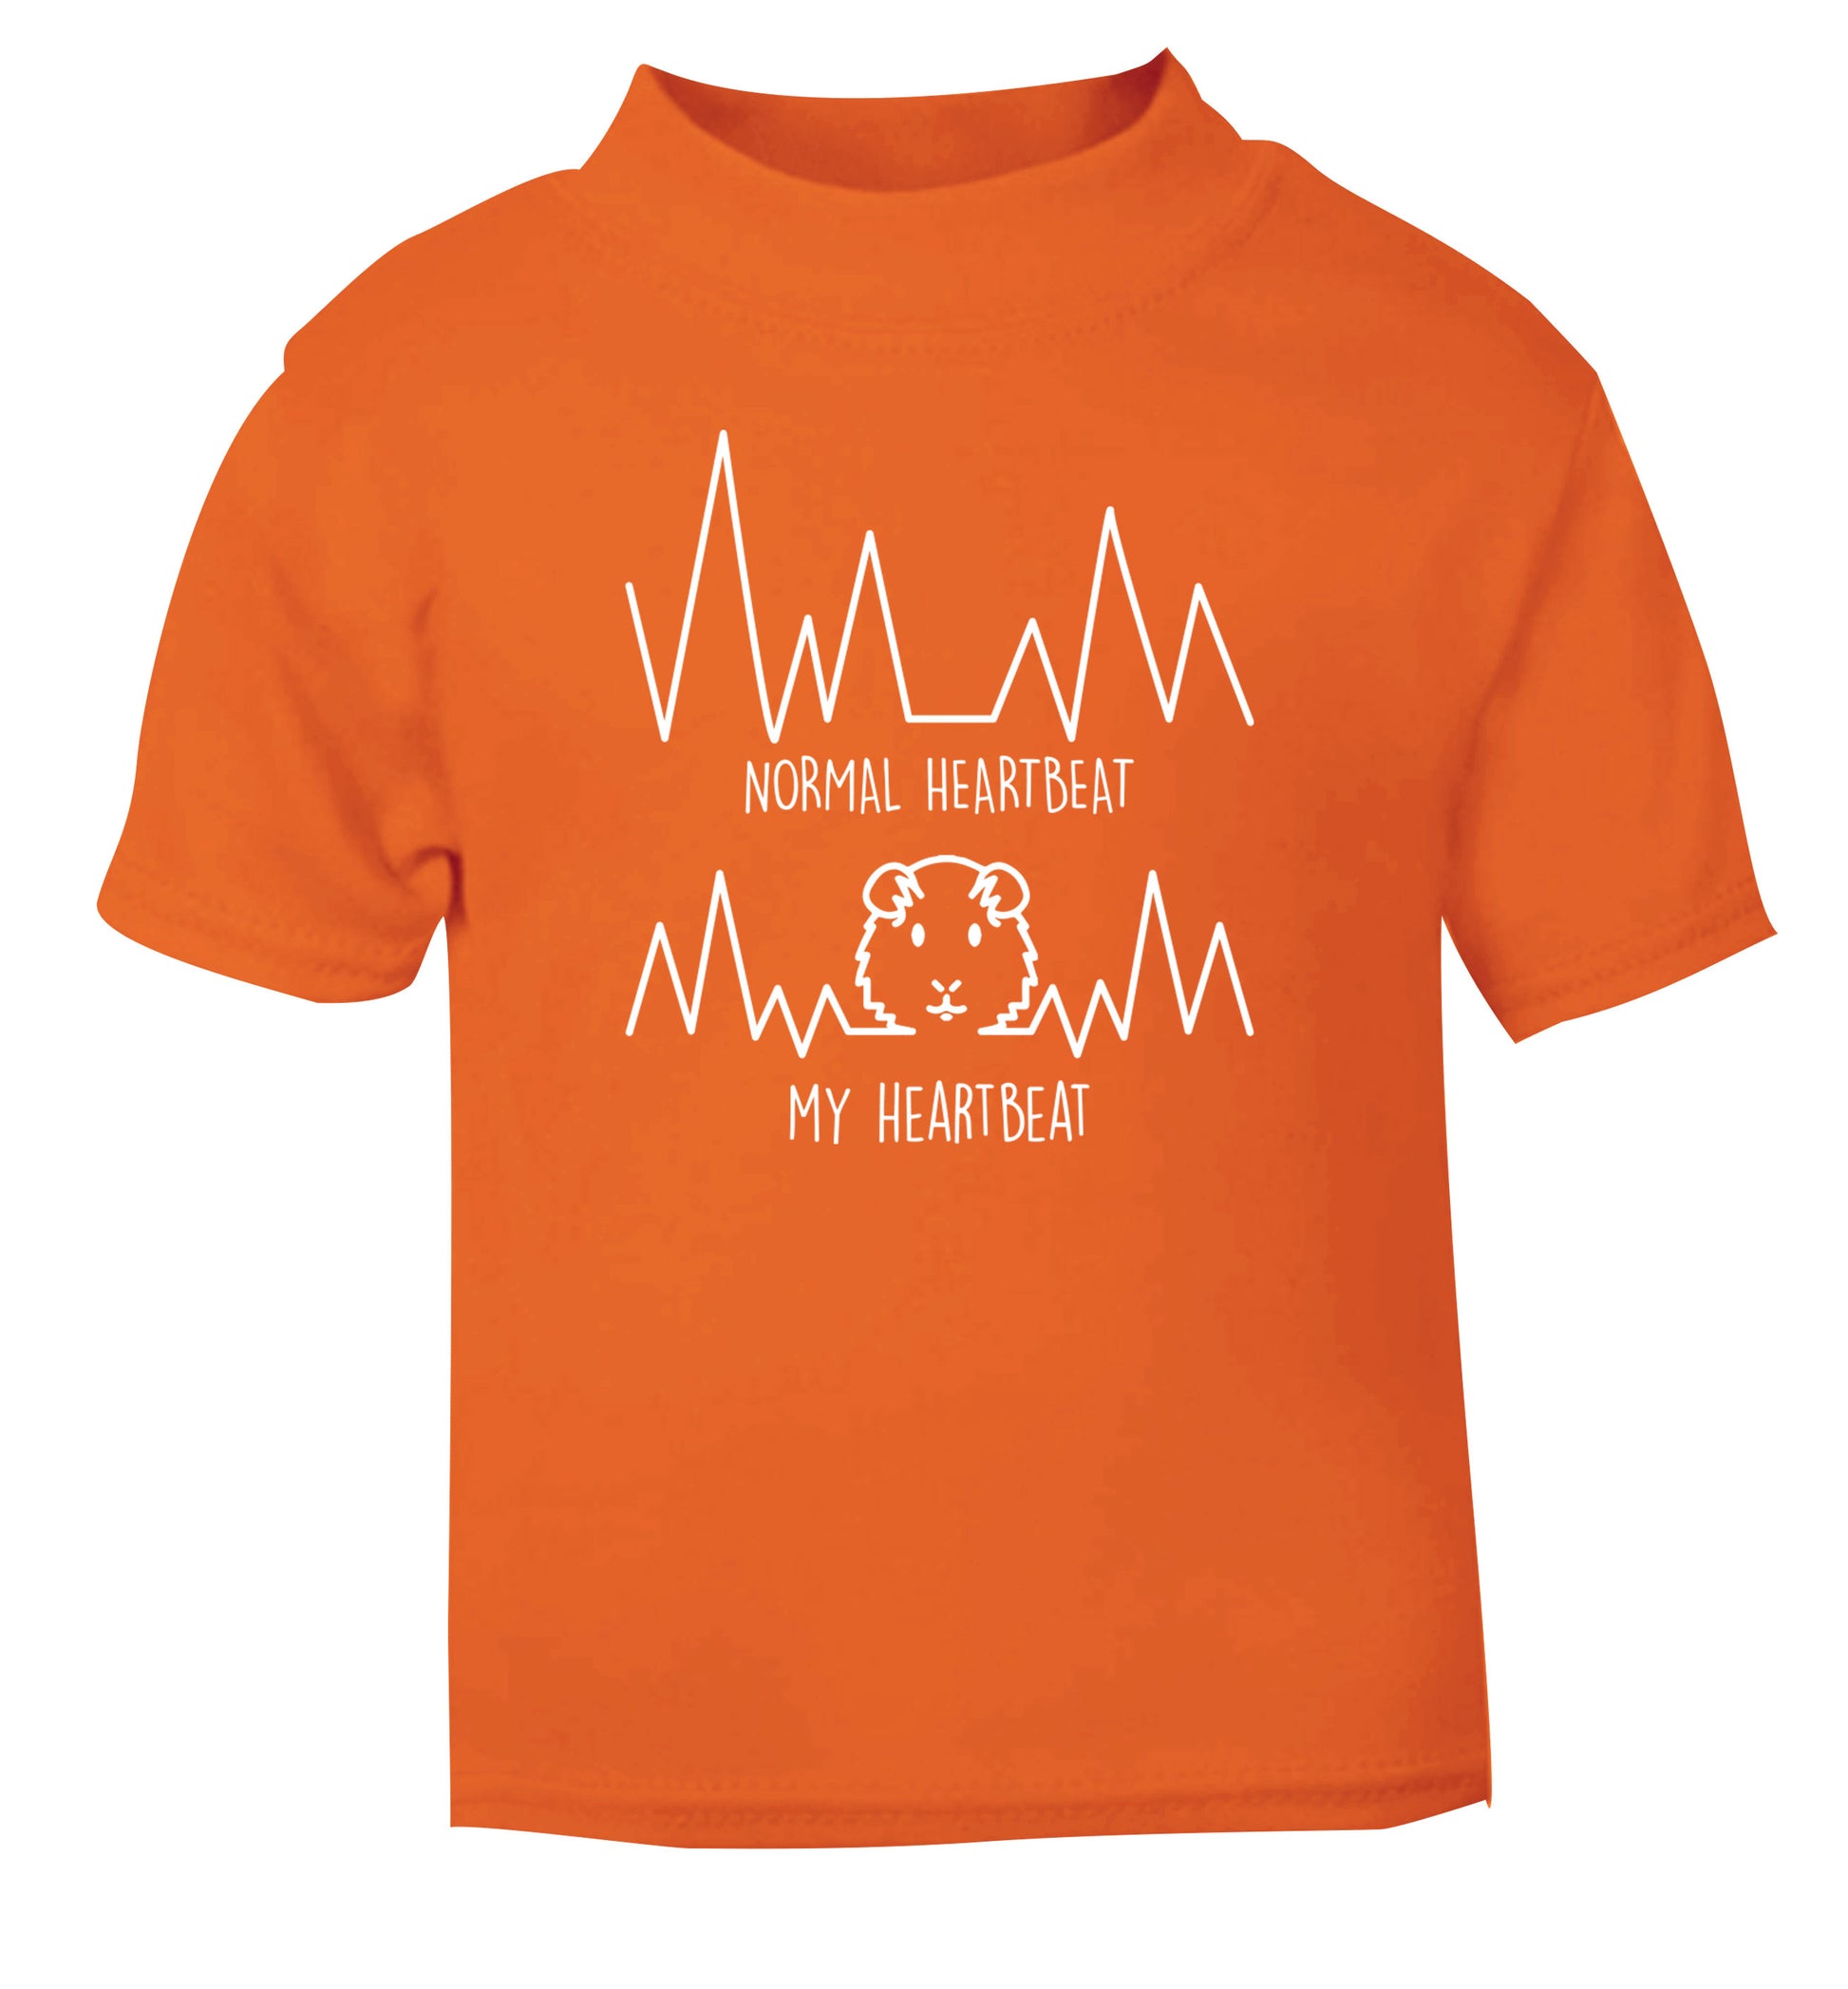 Normal heartbeat vs my heartbeat guinea pig lover orange Baby Toddler Tshirt 2 Years